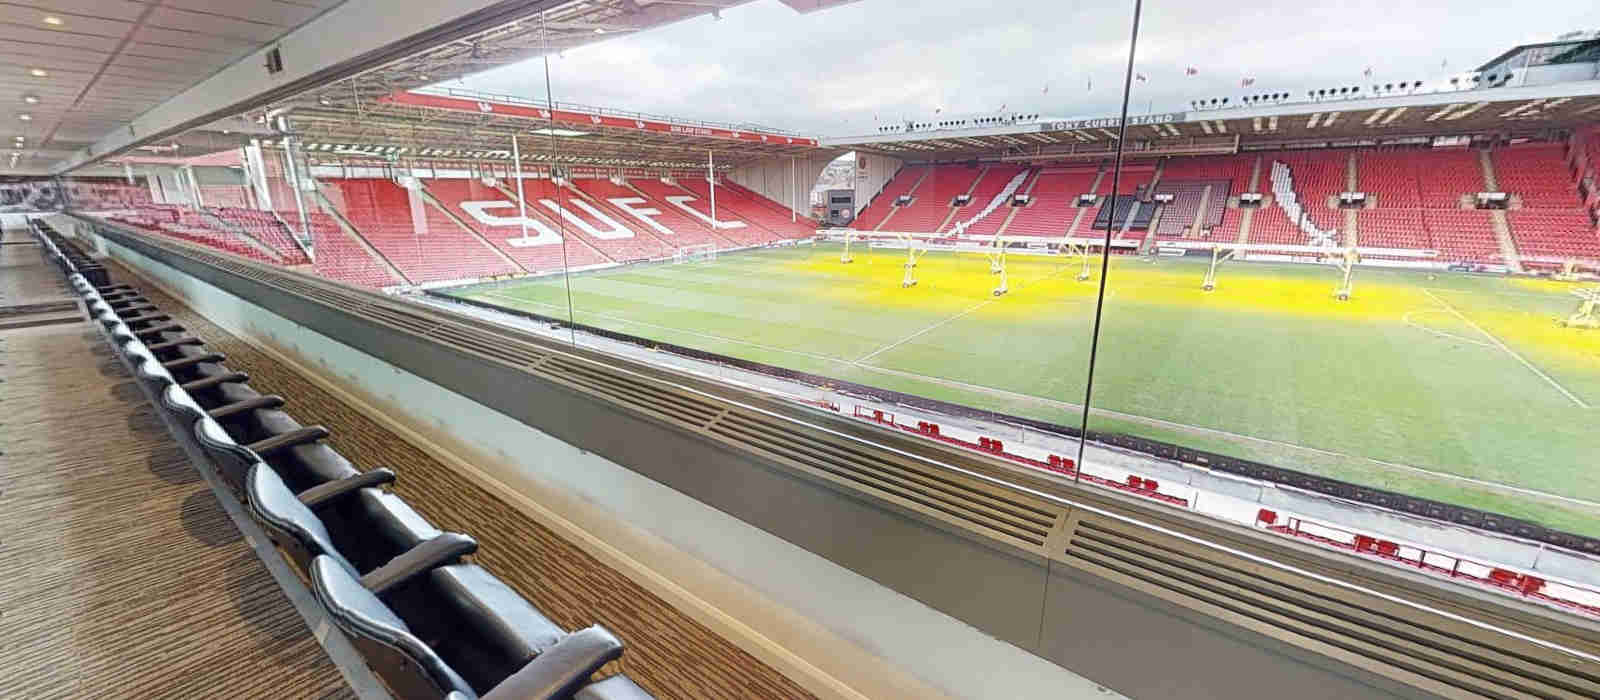 Meetings And Events At Sheffield United John Street Stand 03152023 180452 (1)